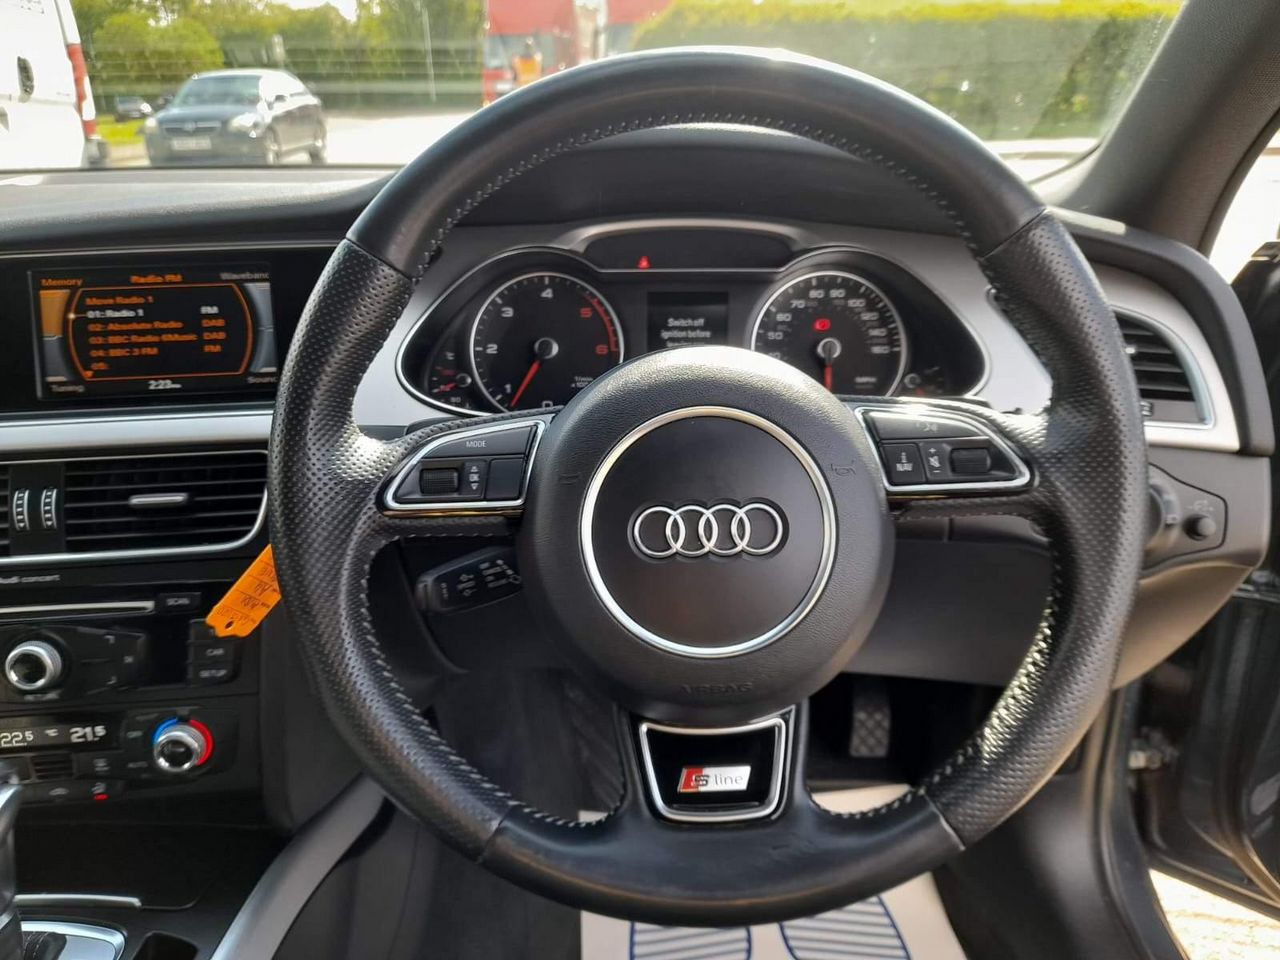 2015 Audi A4 3.0 TDI V6 S line S Tronic quattro Euro 5 (s/s) 4dr - Picture 25 of 47